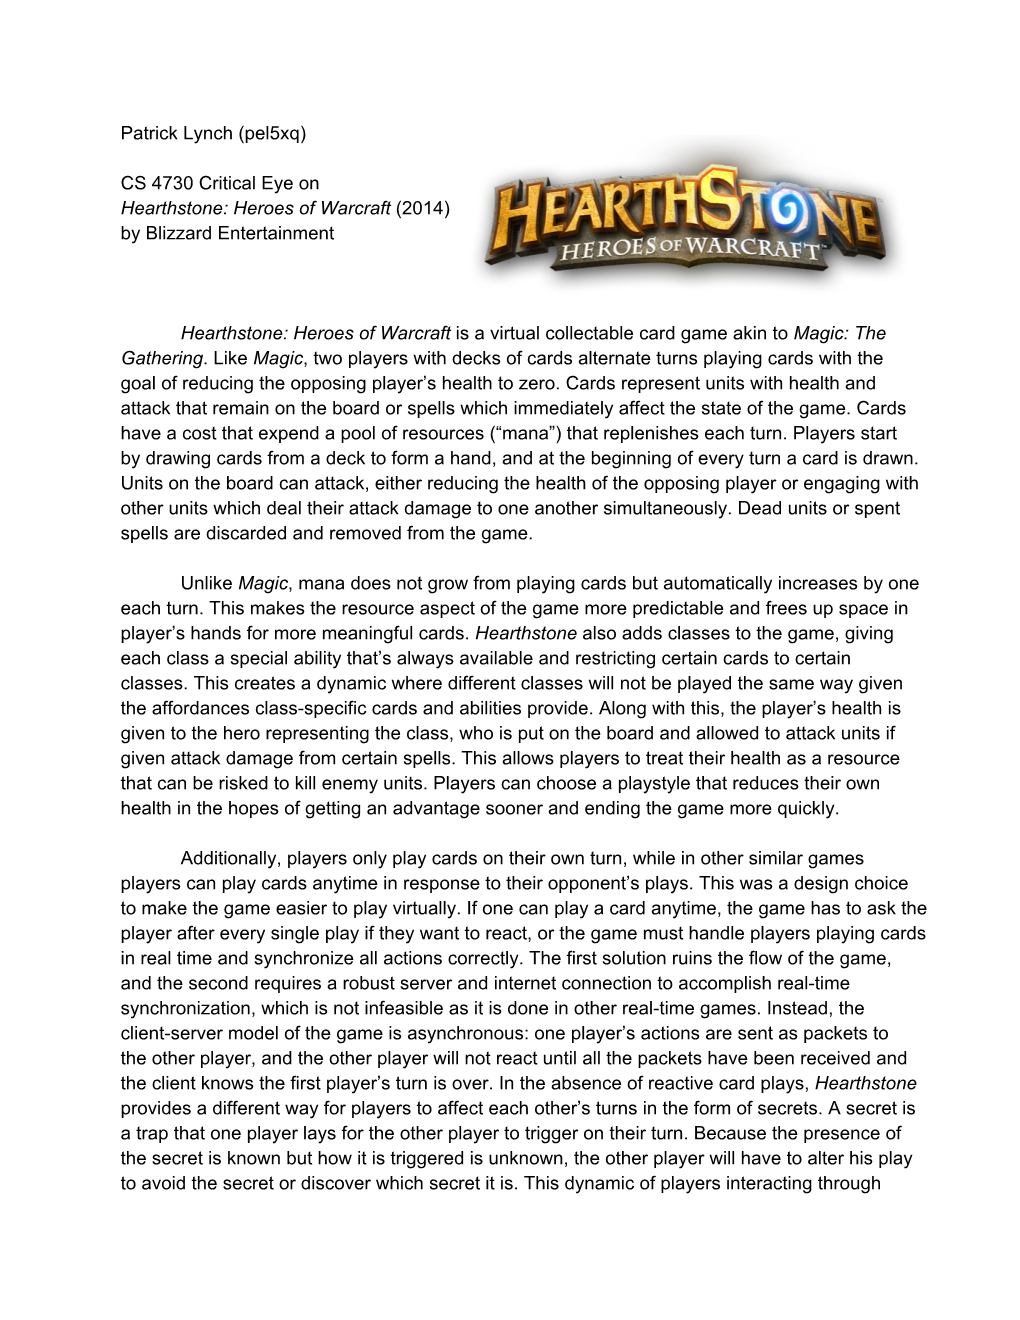 CS 4730 Critical Eye on Hearthstone: Heroes of Warcraft (2014) by Blizzard Entertainment